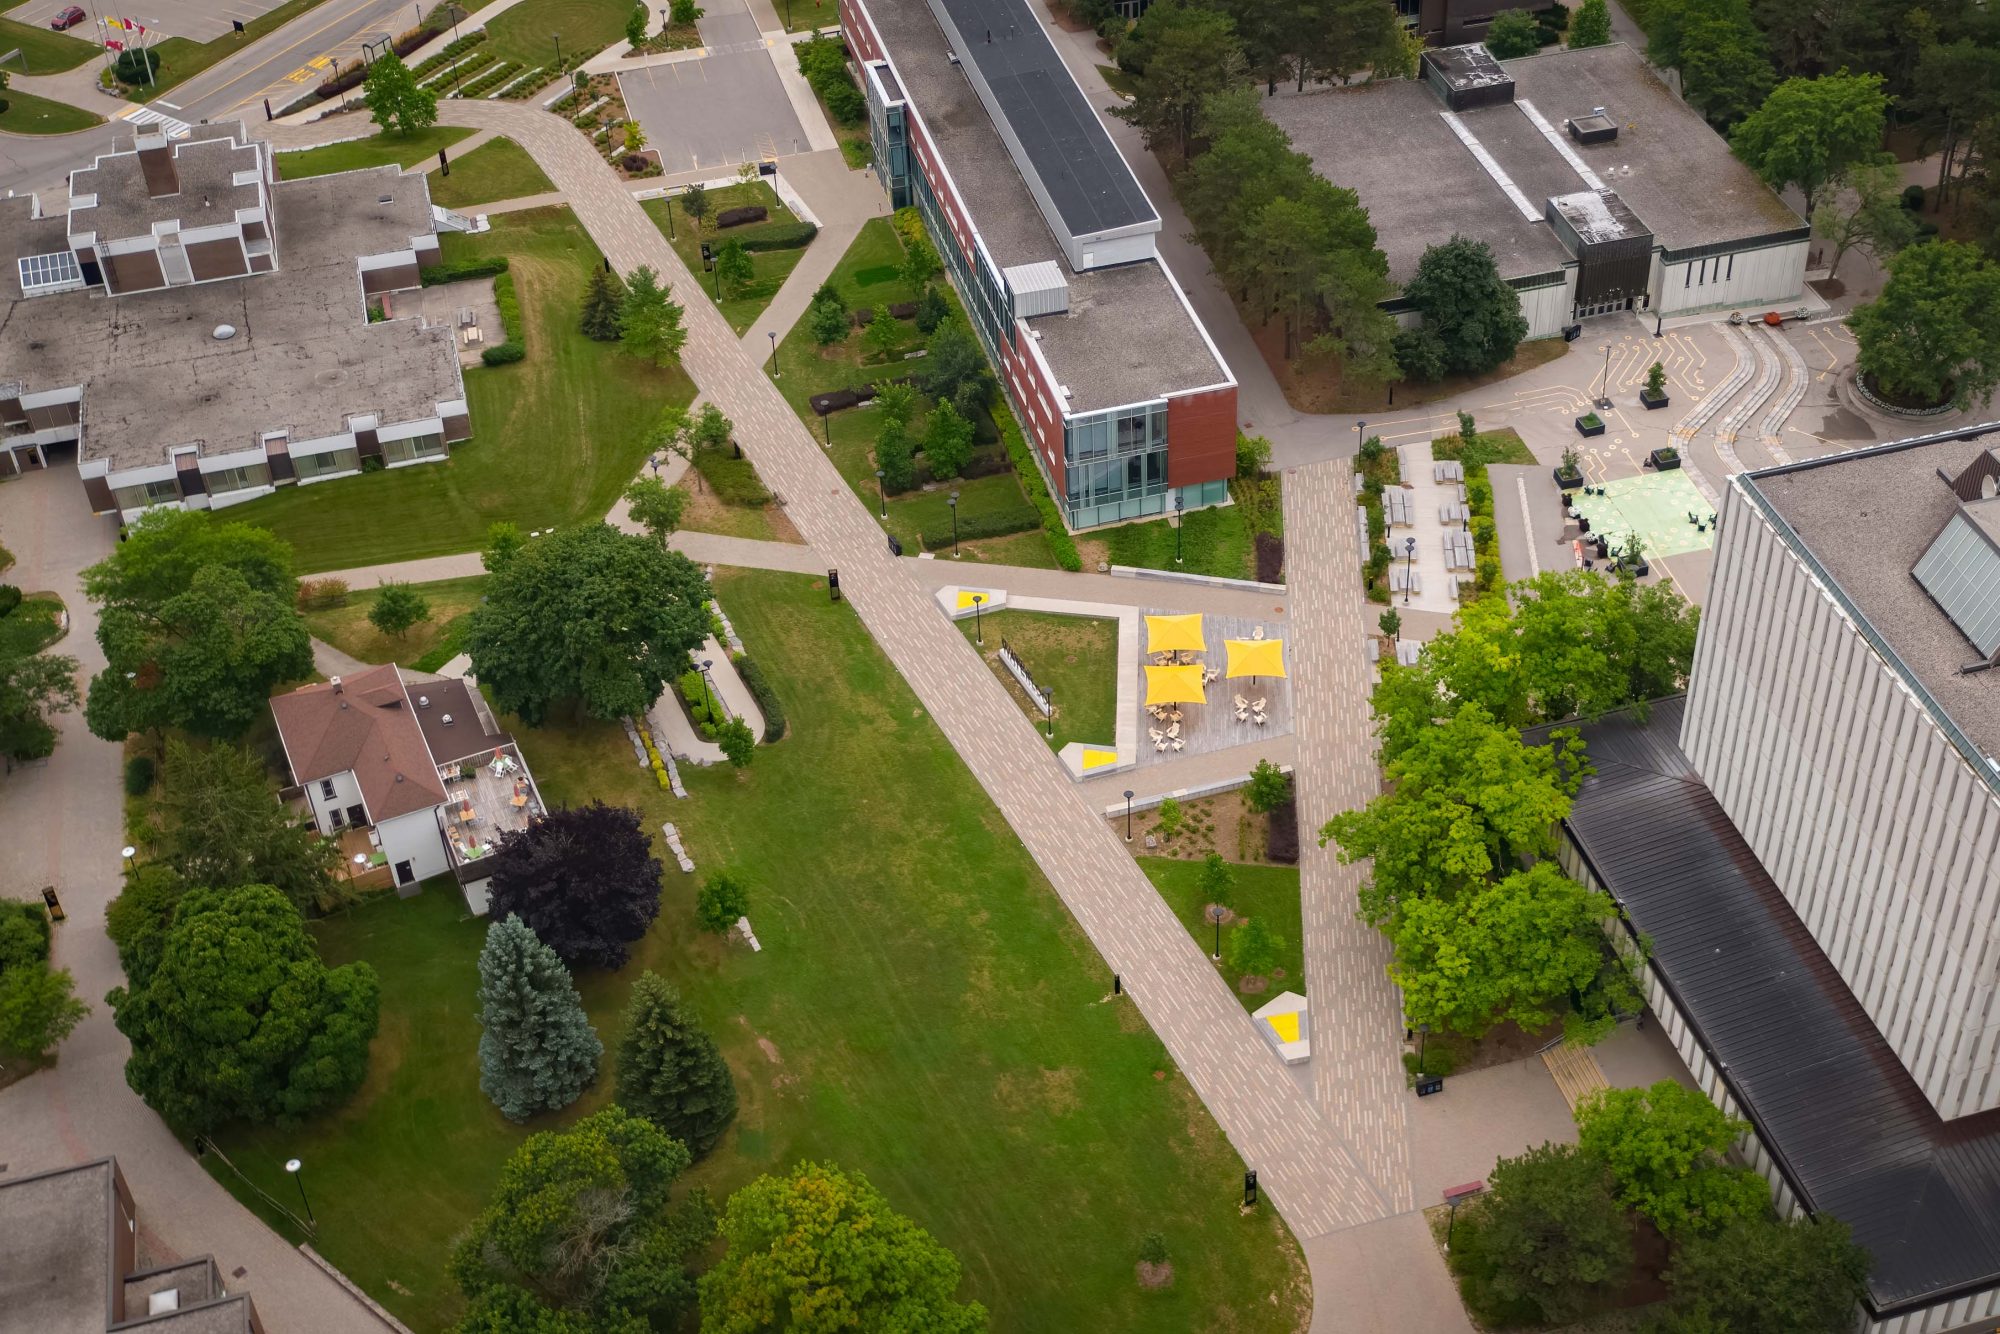 Wide angle aerial view of the University of Waterloo campus grounds showing path towards the South Common area via linear interlocked paving.